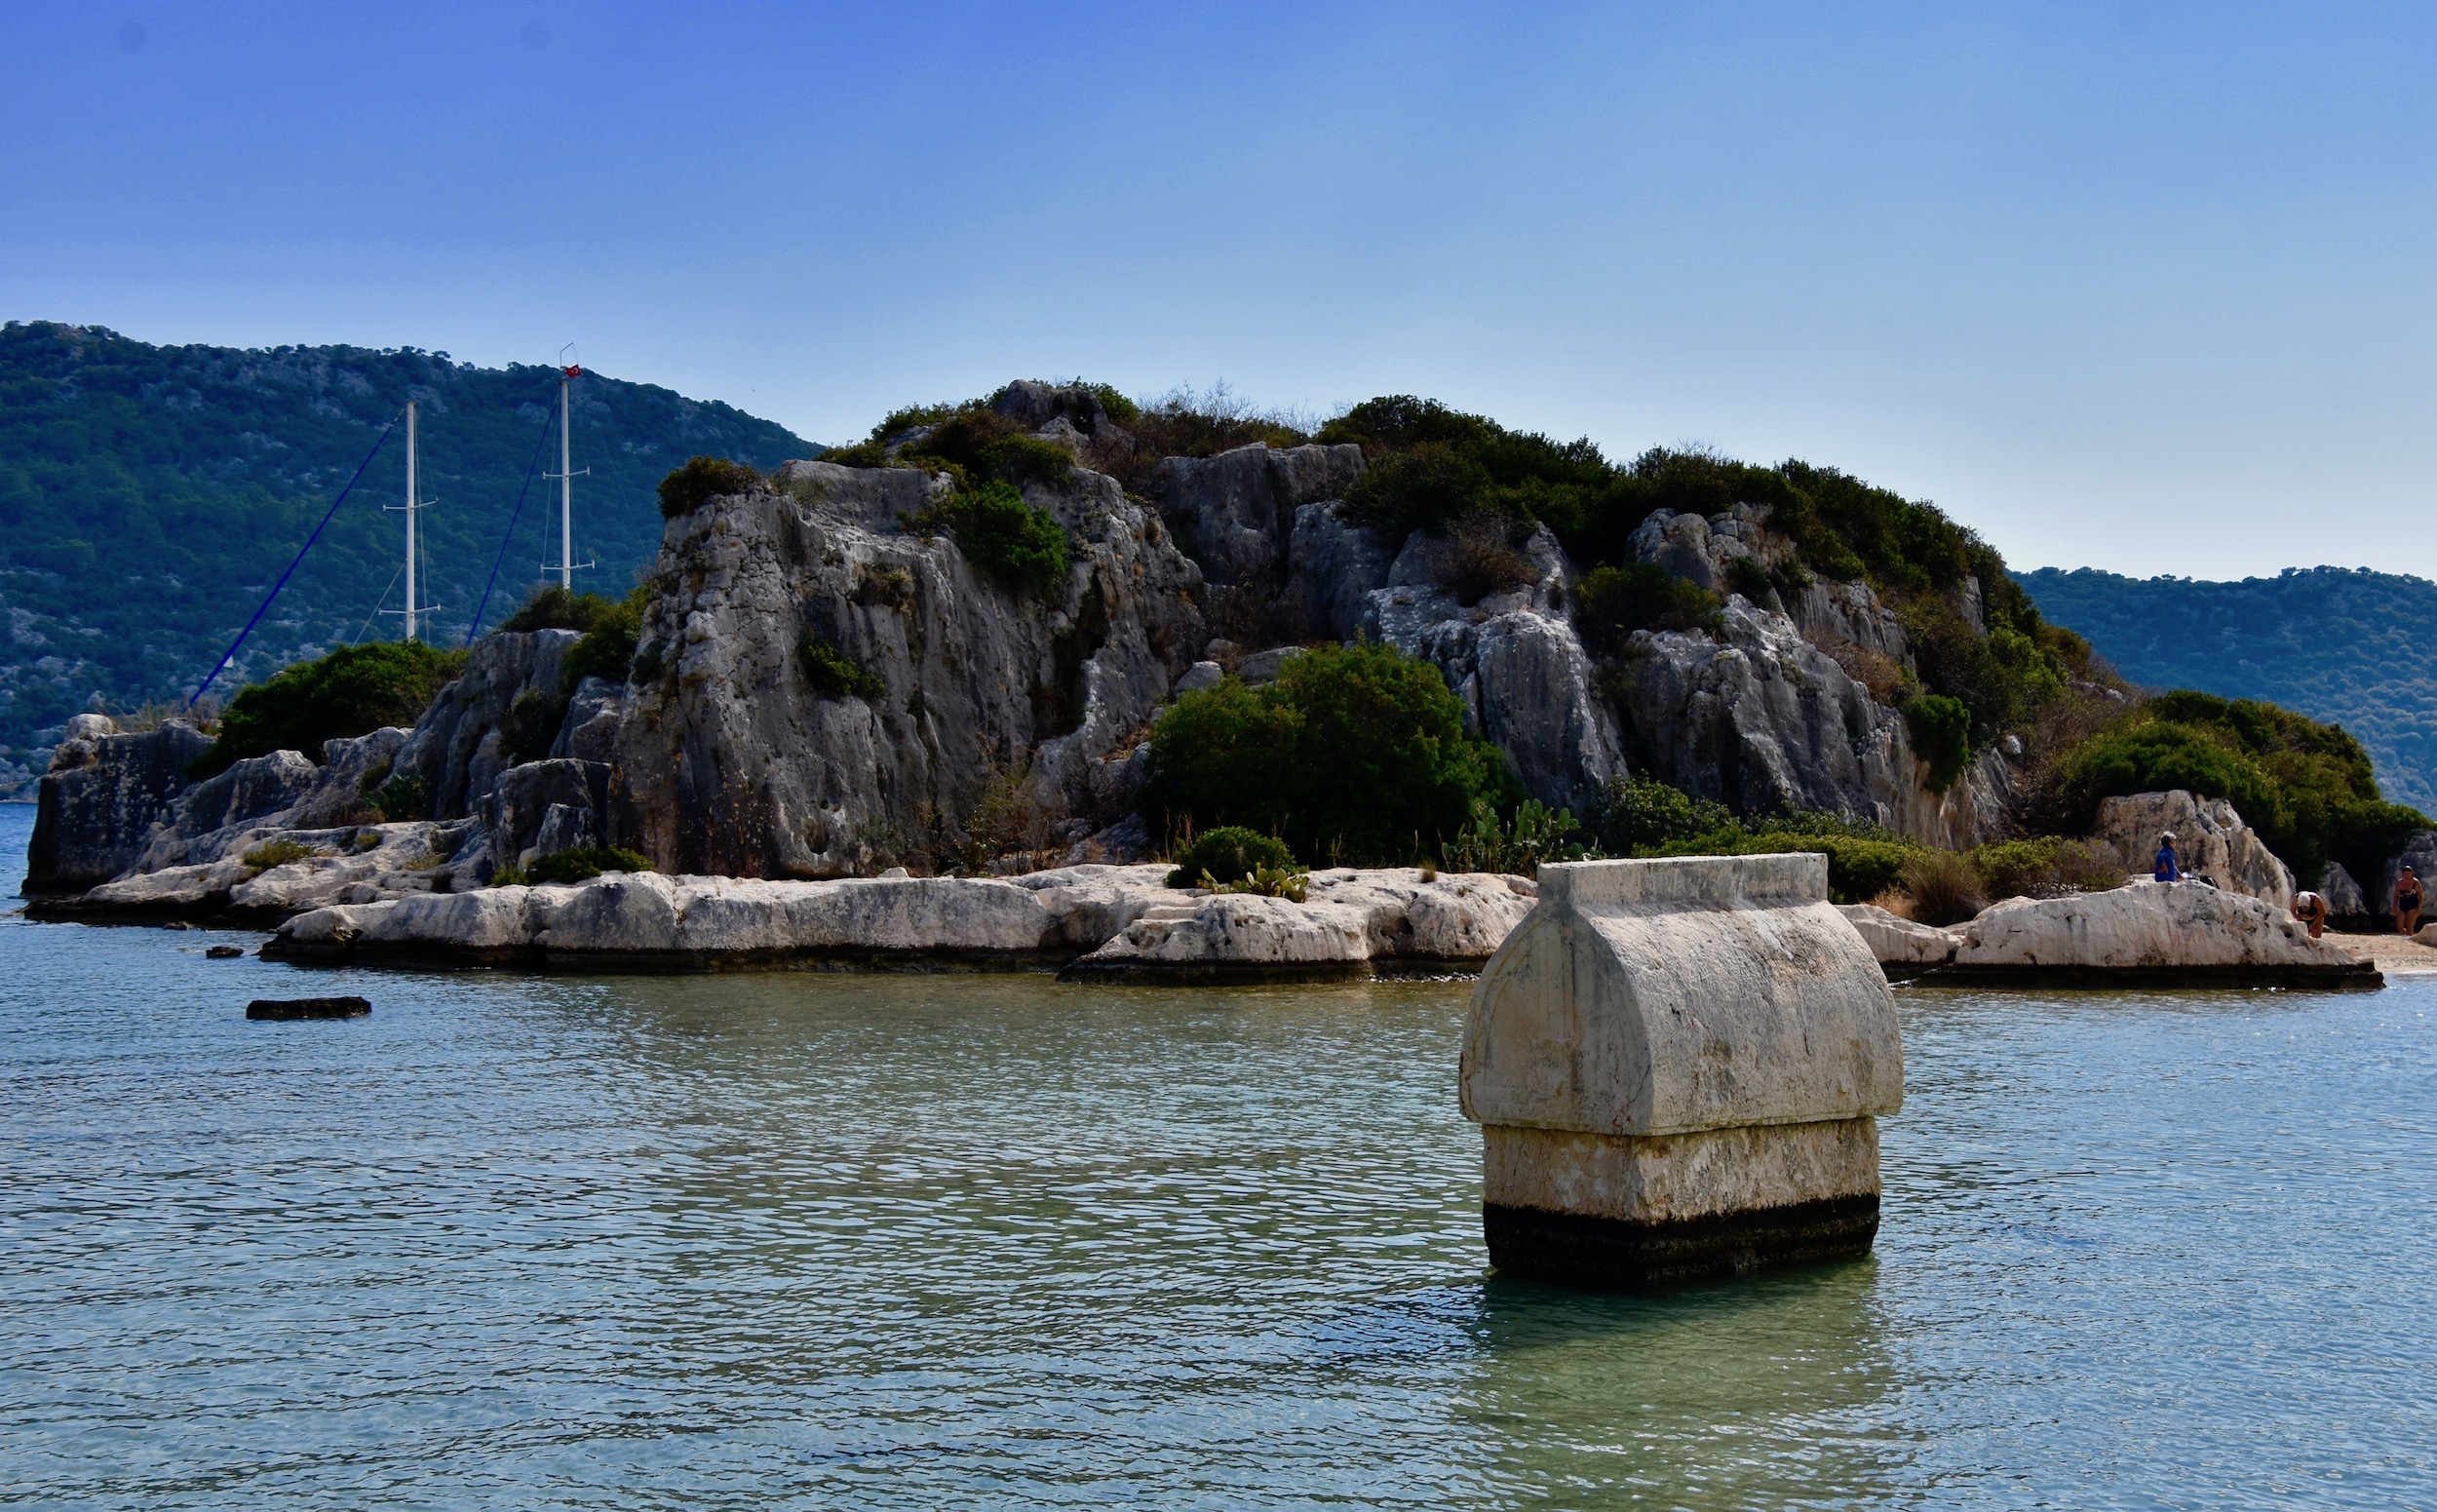 Lycian Tomb in the Water at Kalekoy, the Turquoise Coast